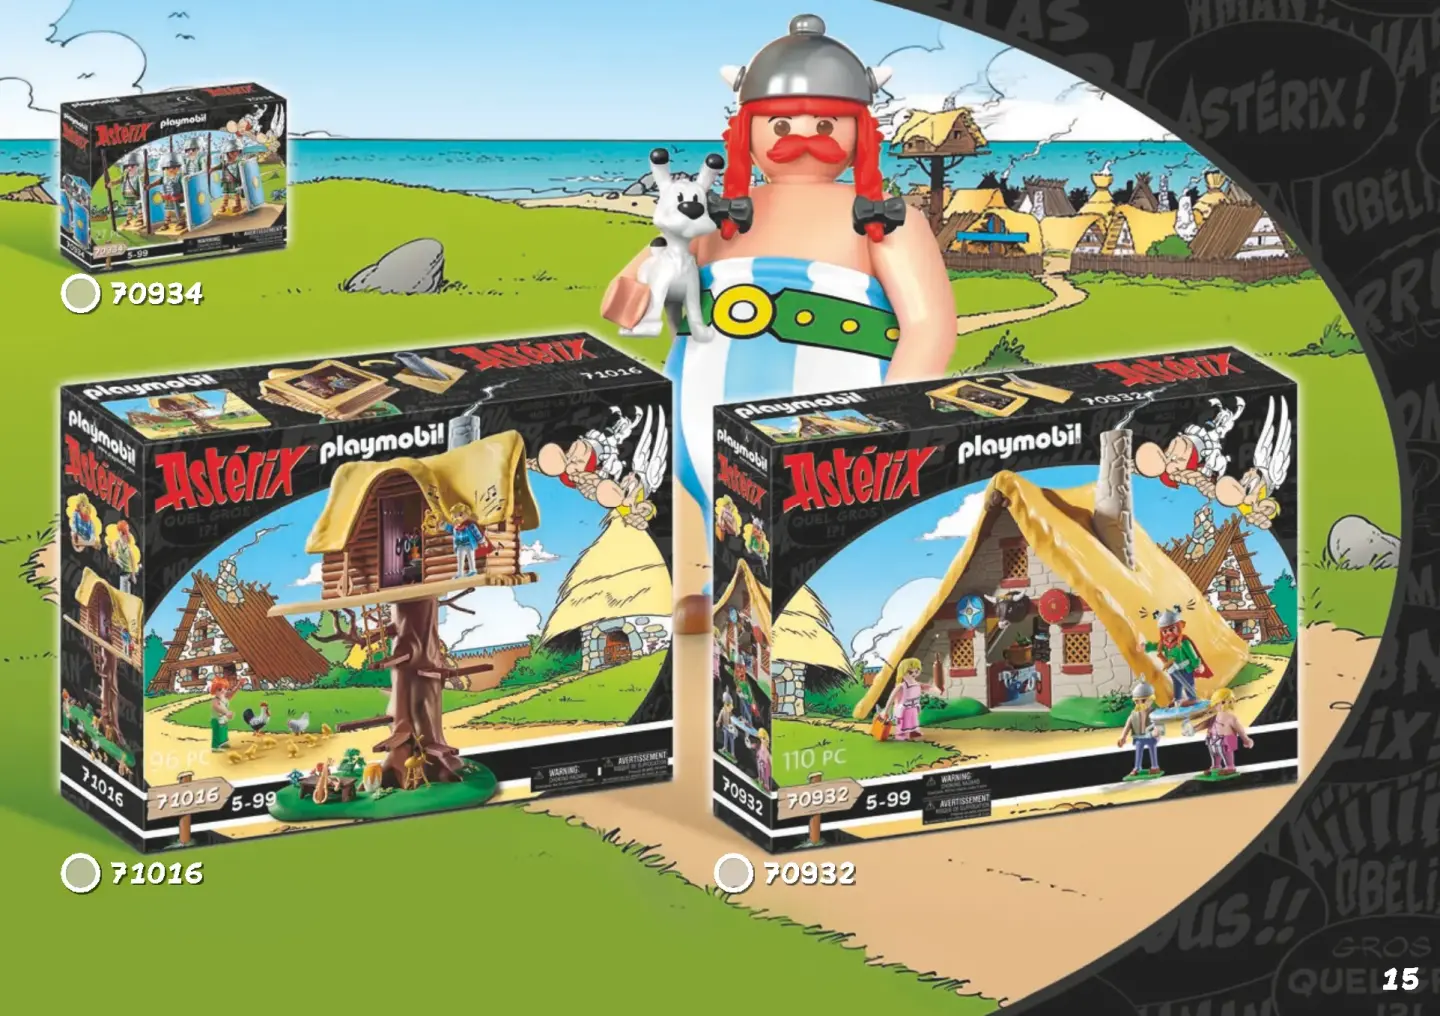 Playmobil Asterix Set 71015 Boxed and 2x Set 70934 Romans